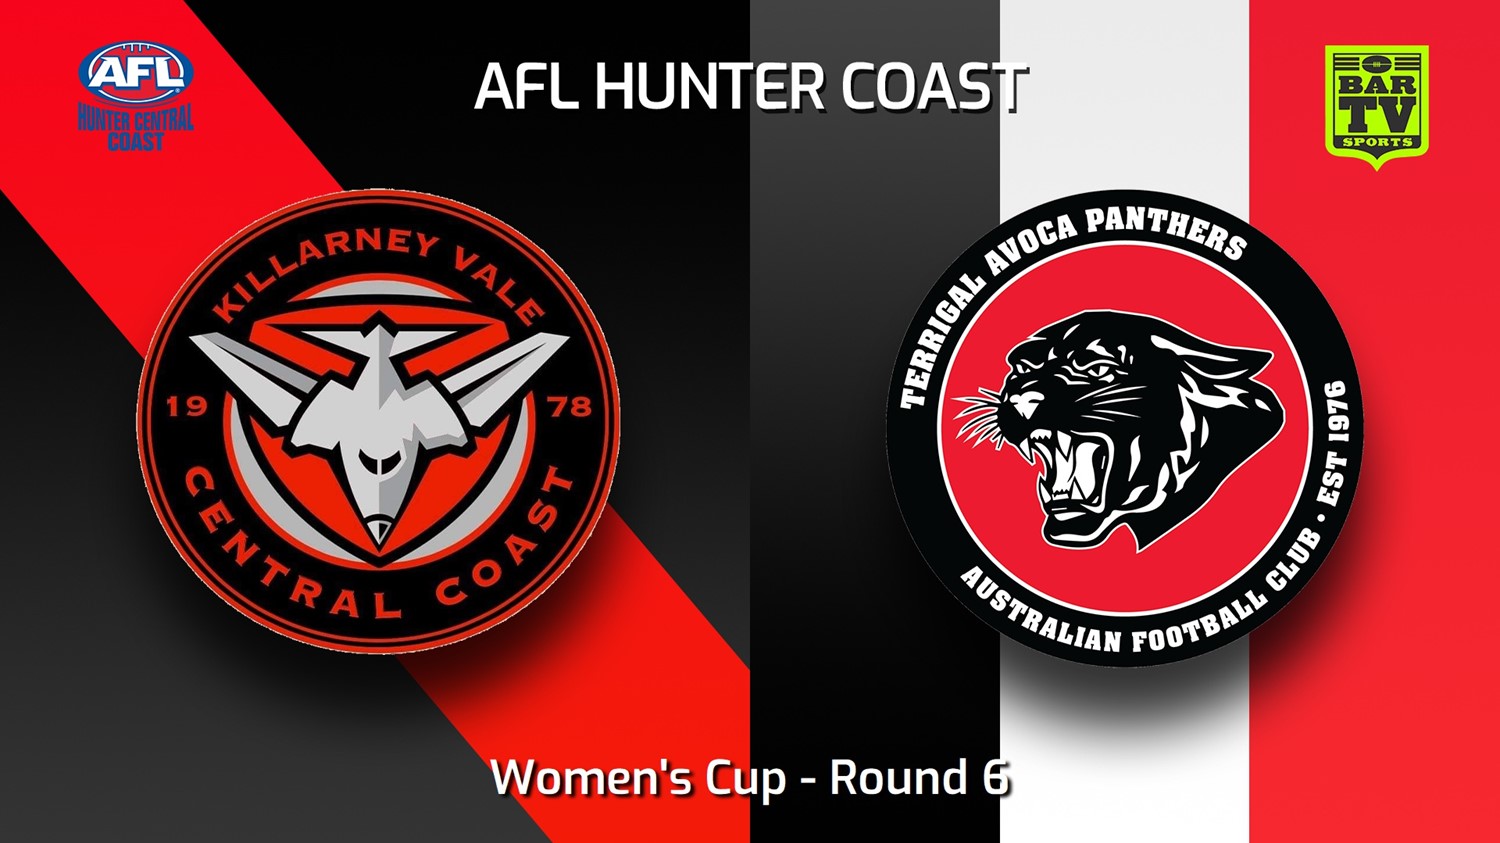 230513-AFL Hunter Central Coast Round 6 - Women's Cup - Killarney Vale Bombers v Terrigal Avoca Panthers Minigame Slate Image